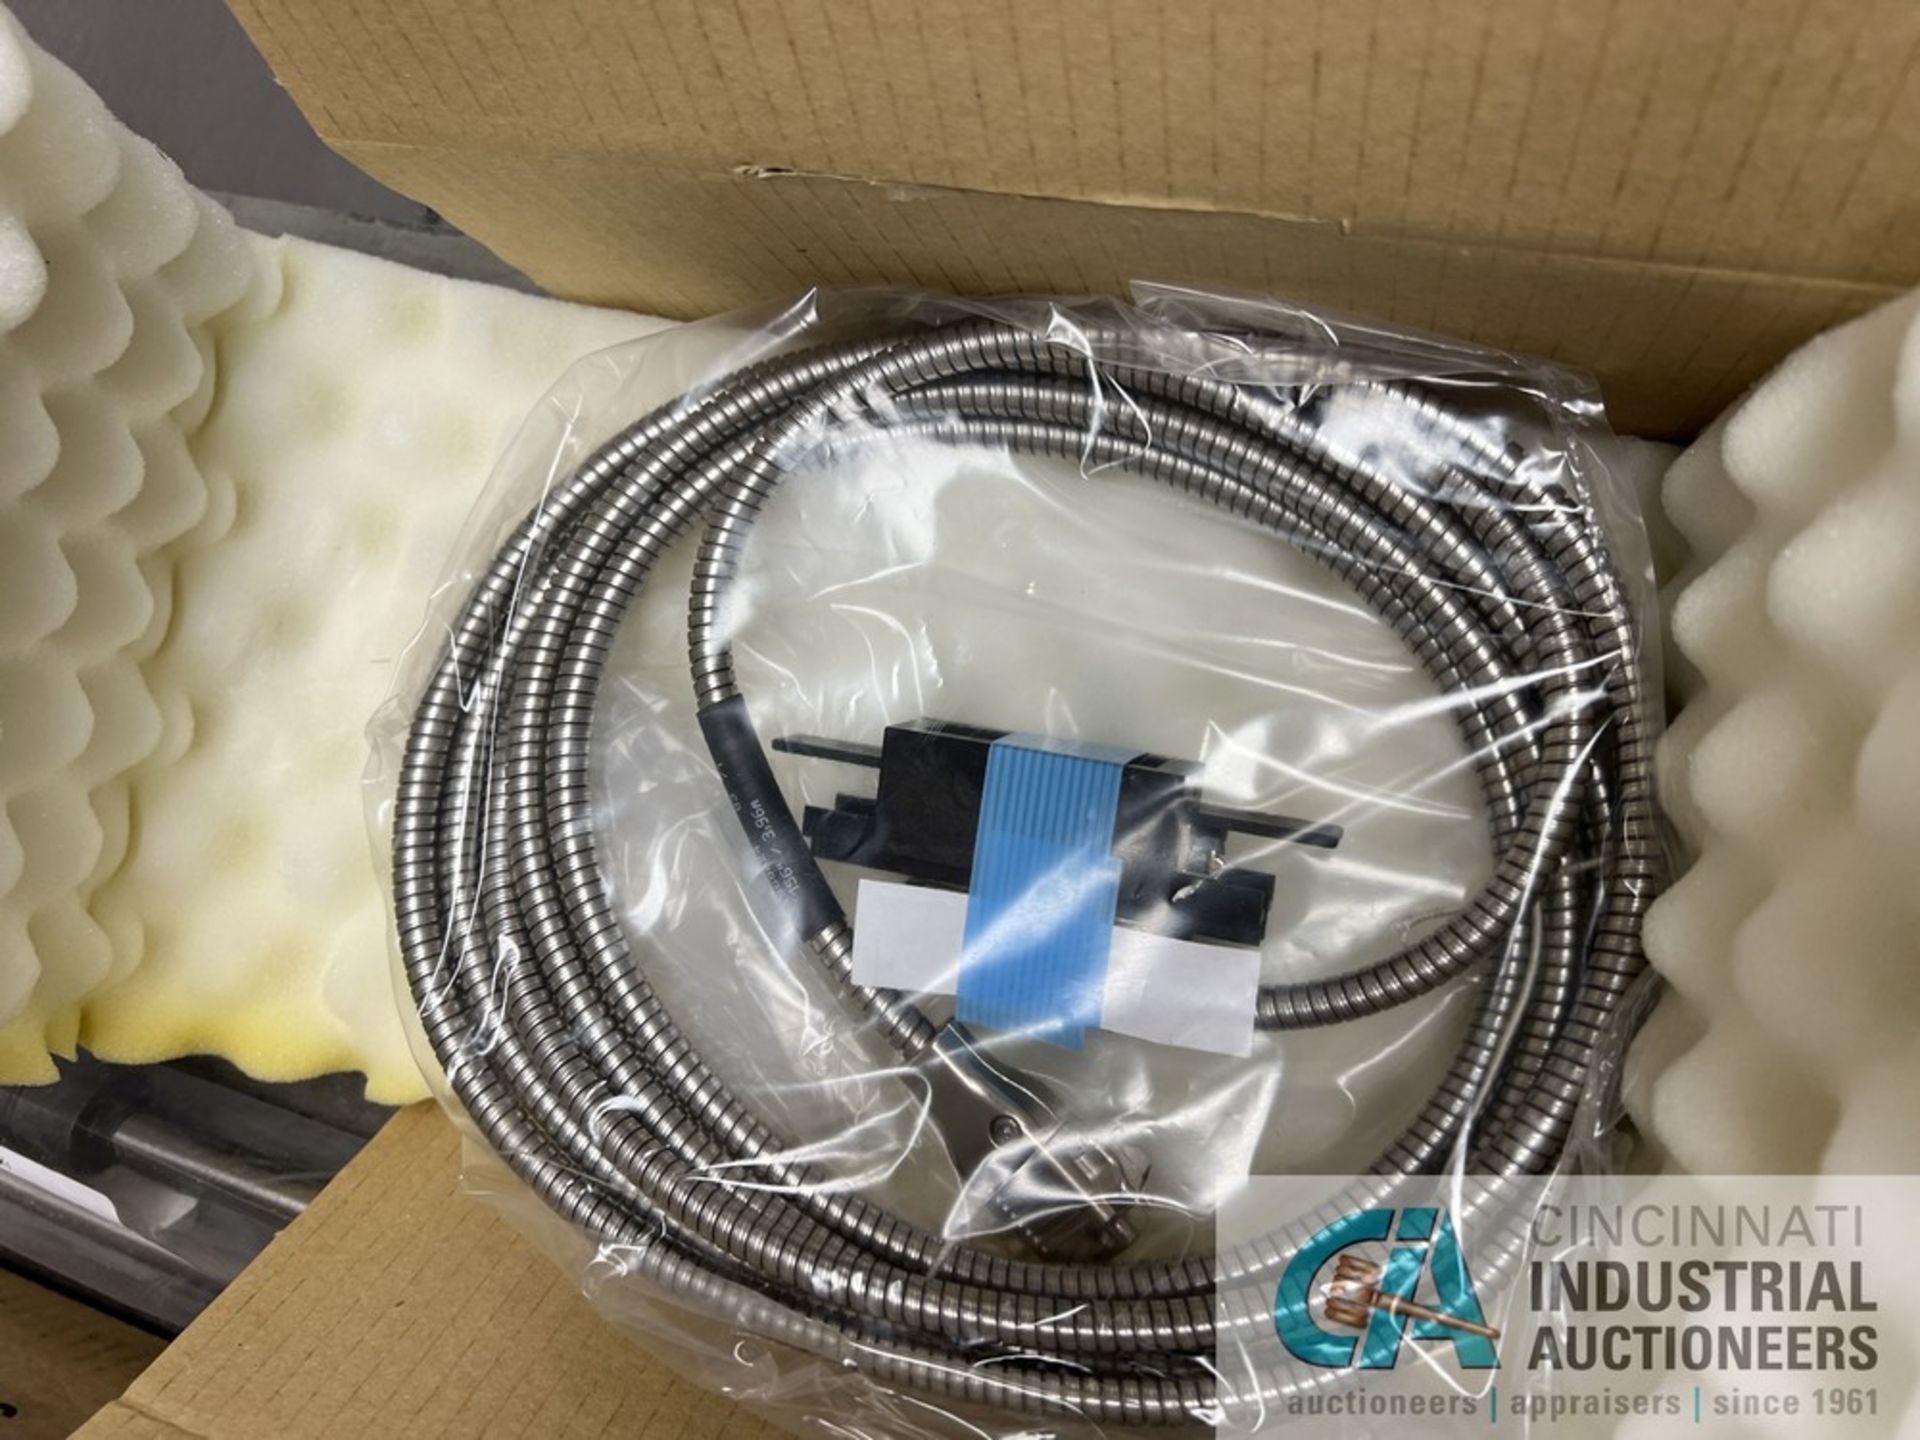 (LOT) ACU-RITE SEND 150 LINEAR ENCODER AND (2) DRAW BARS (MAINTENANCE SHOP) - Image 4 of 4